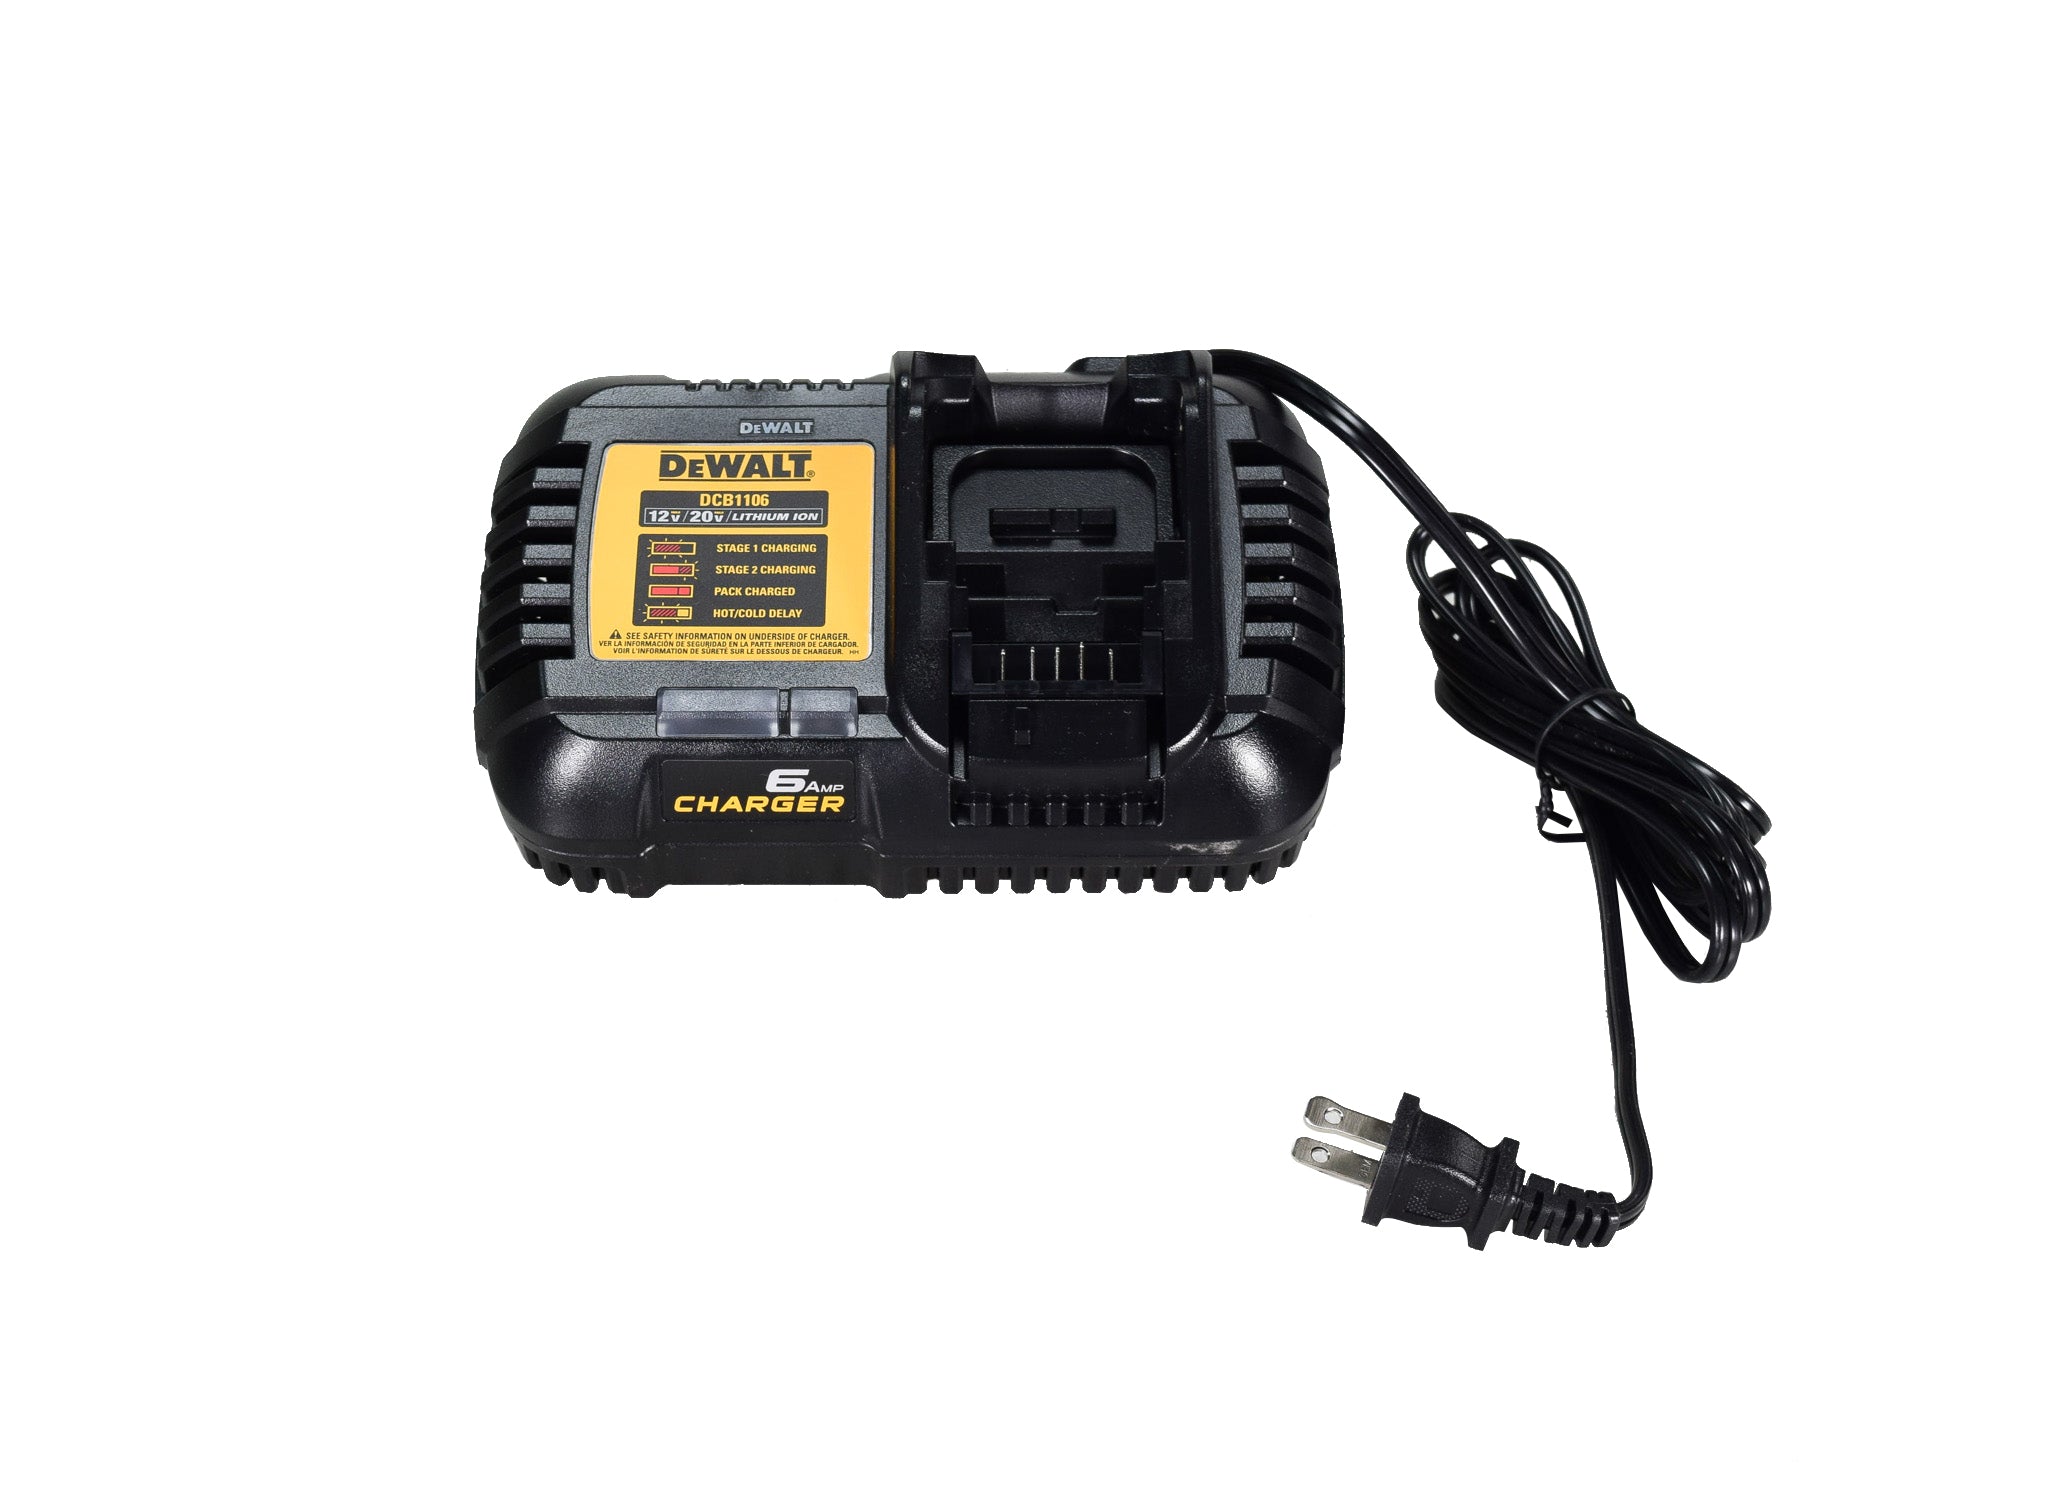 DeWalt DCS570H1 20V Cordless Brushless 7 1/4" Circular Saw Kit with 5.0Ah Battery and Charger